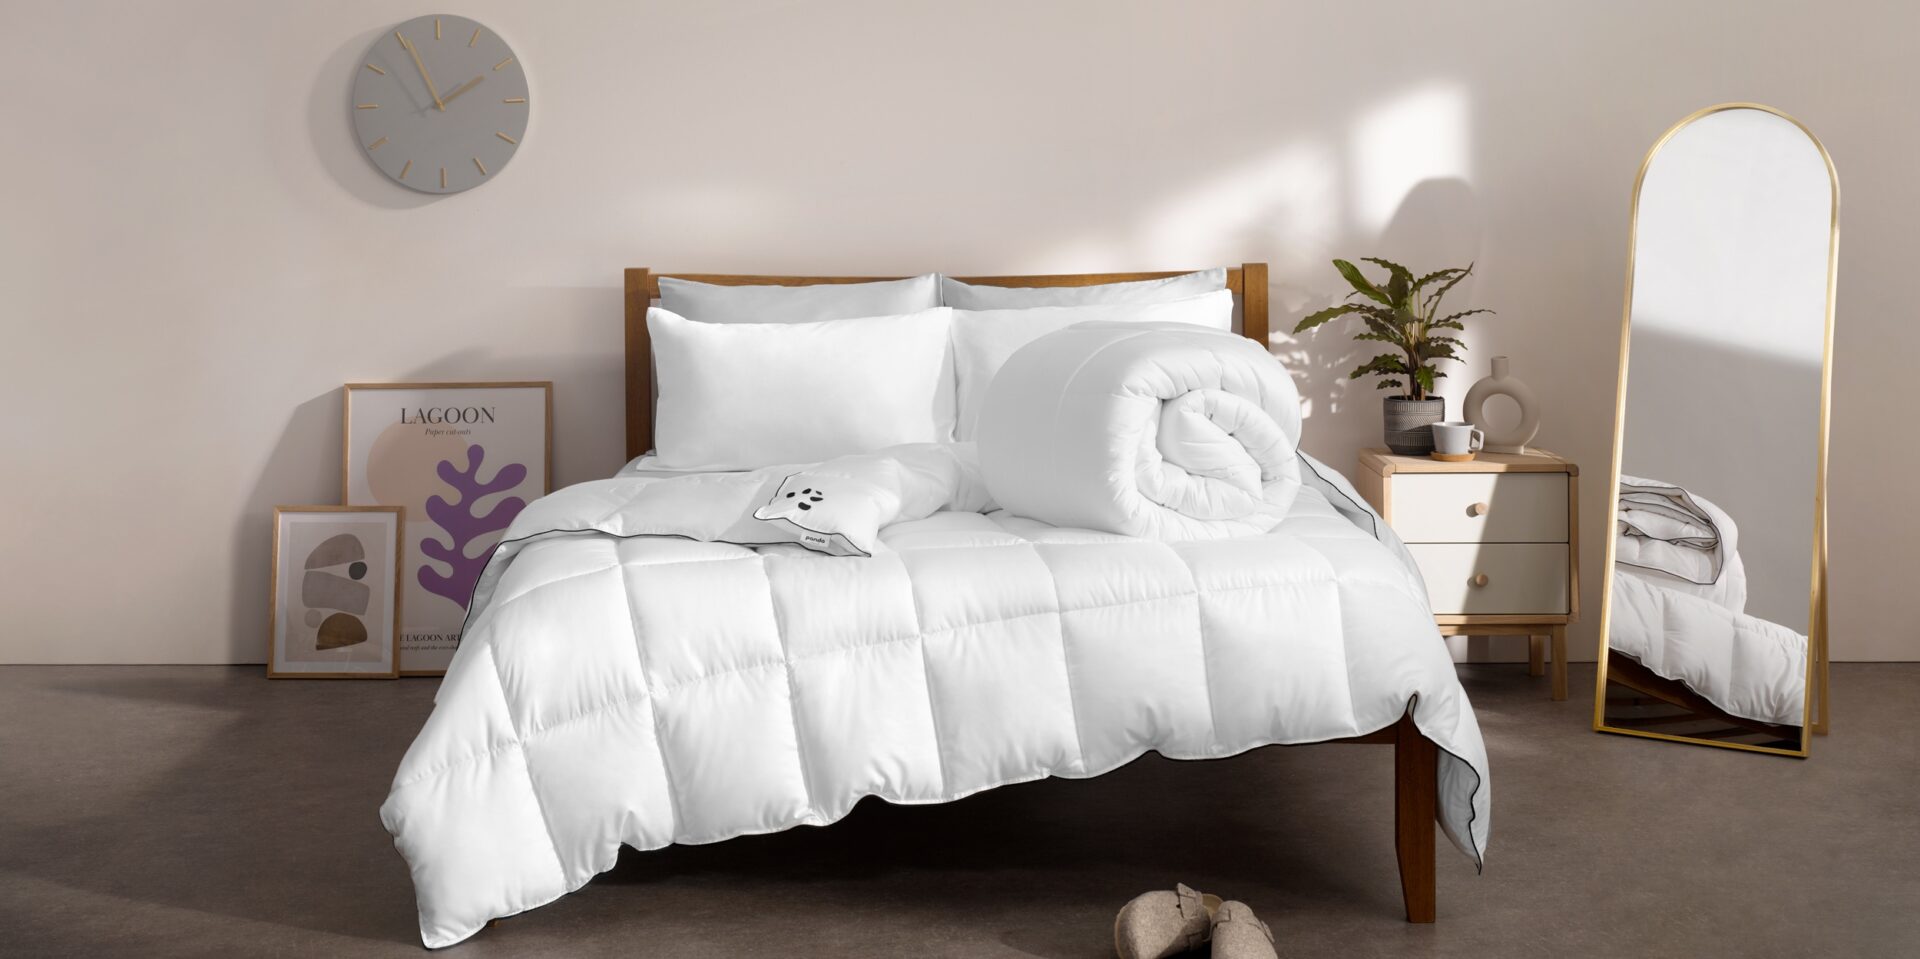 Cloud Bamboo Duvet on Bed Rolled Logo Shown Lifestyle Image